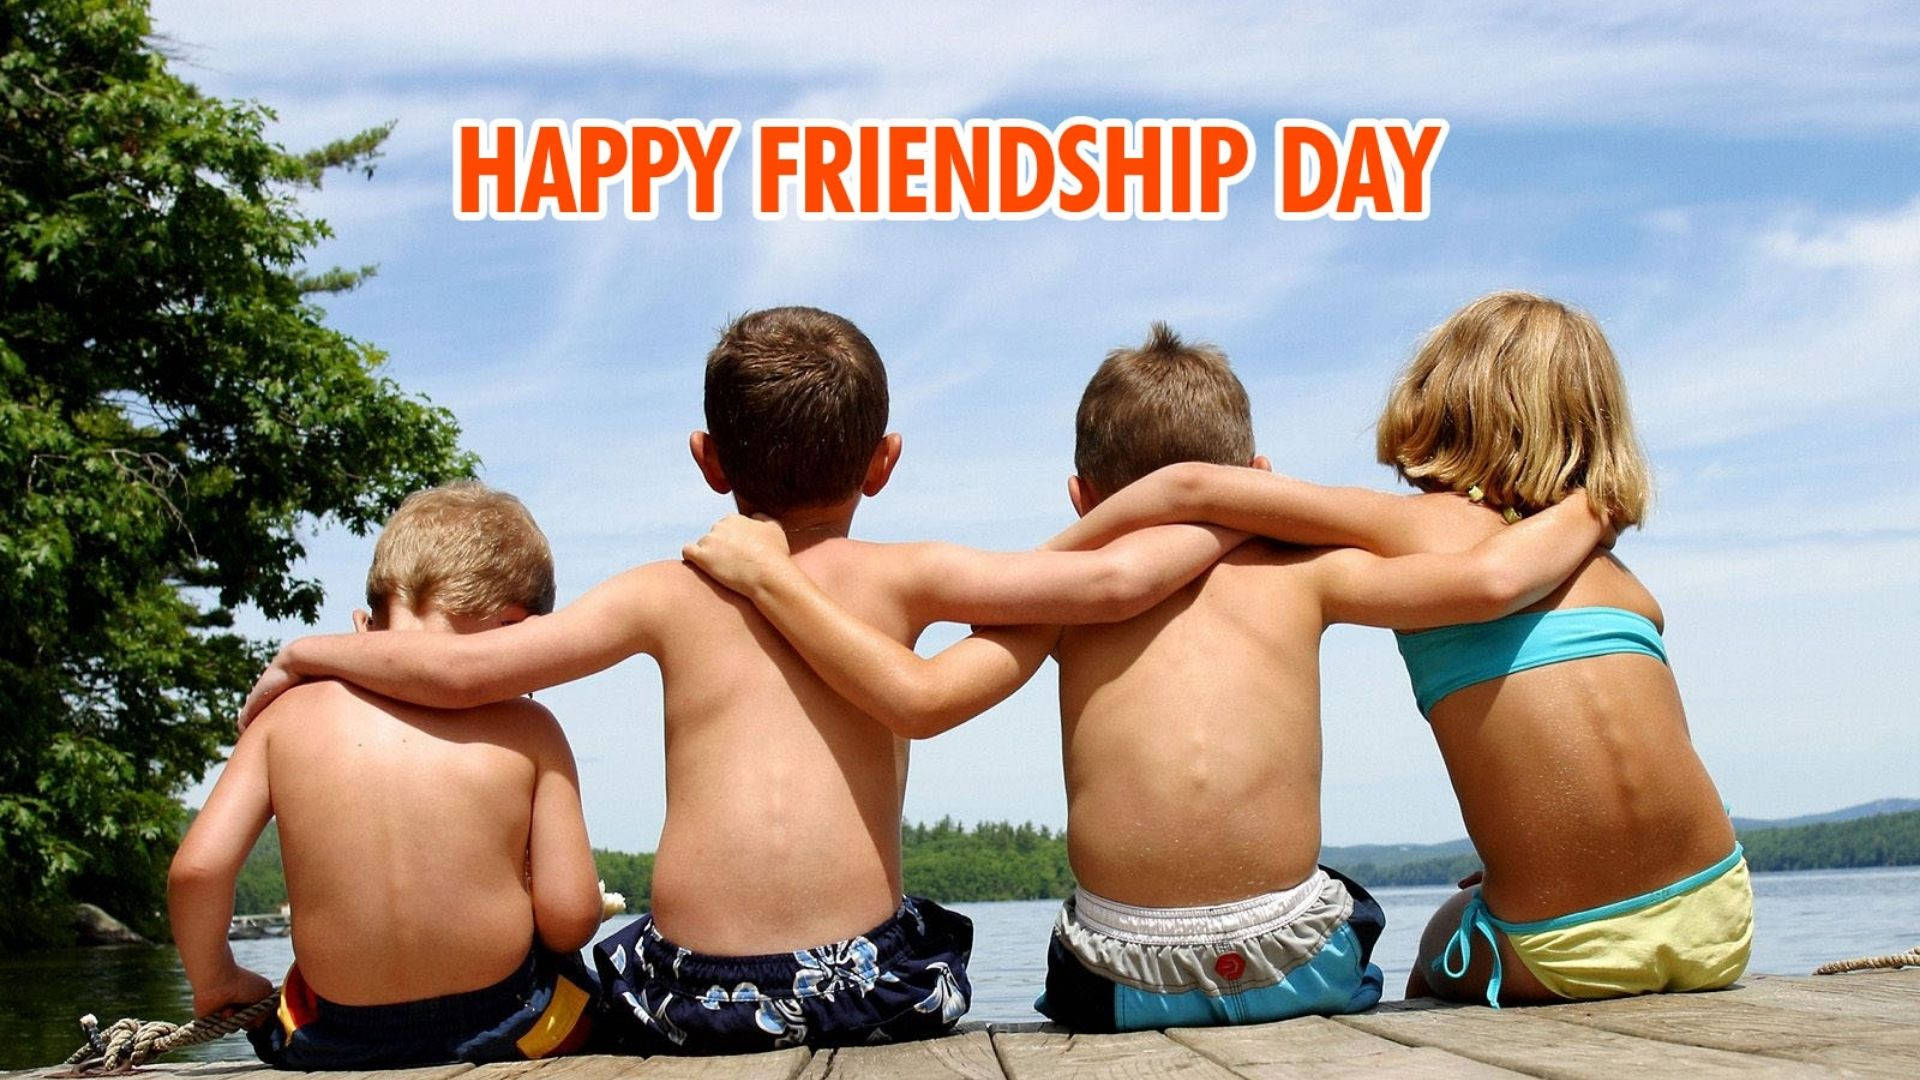 Kids Embracing For Friendship Day Wallpaper